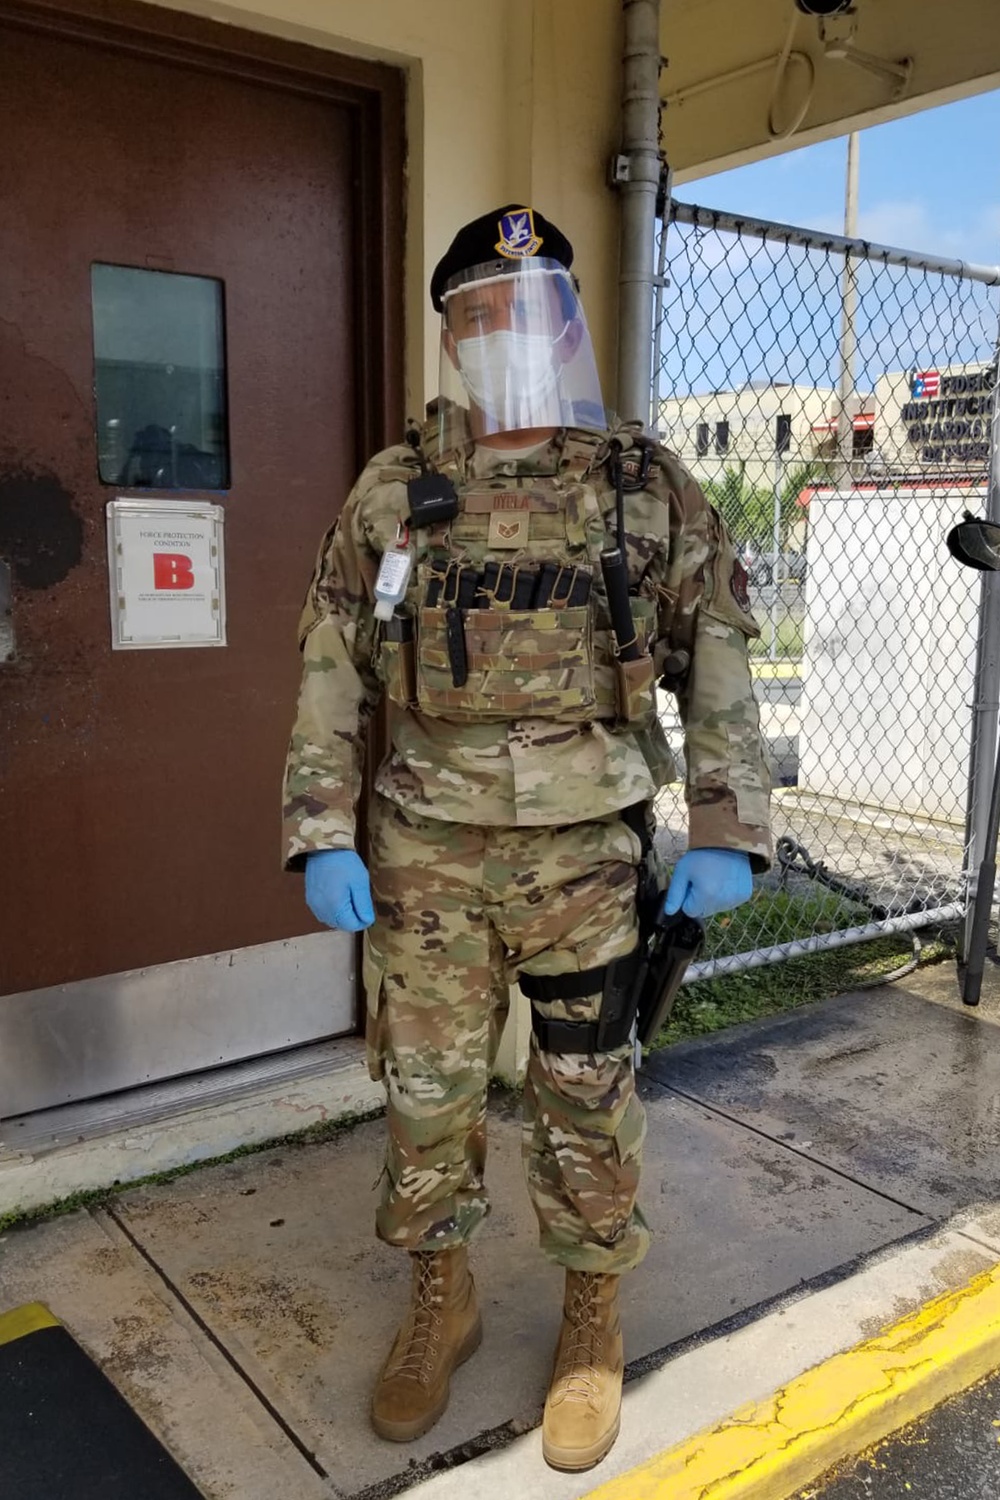 156th Security Forces Squadron work in PPE during COVID-19